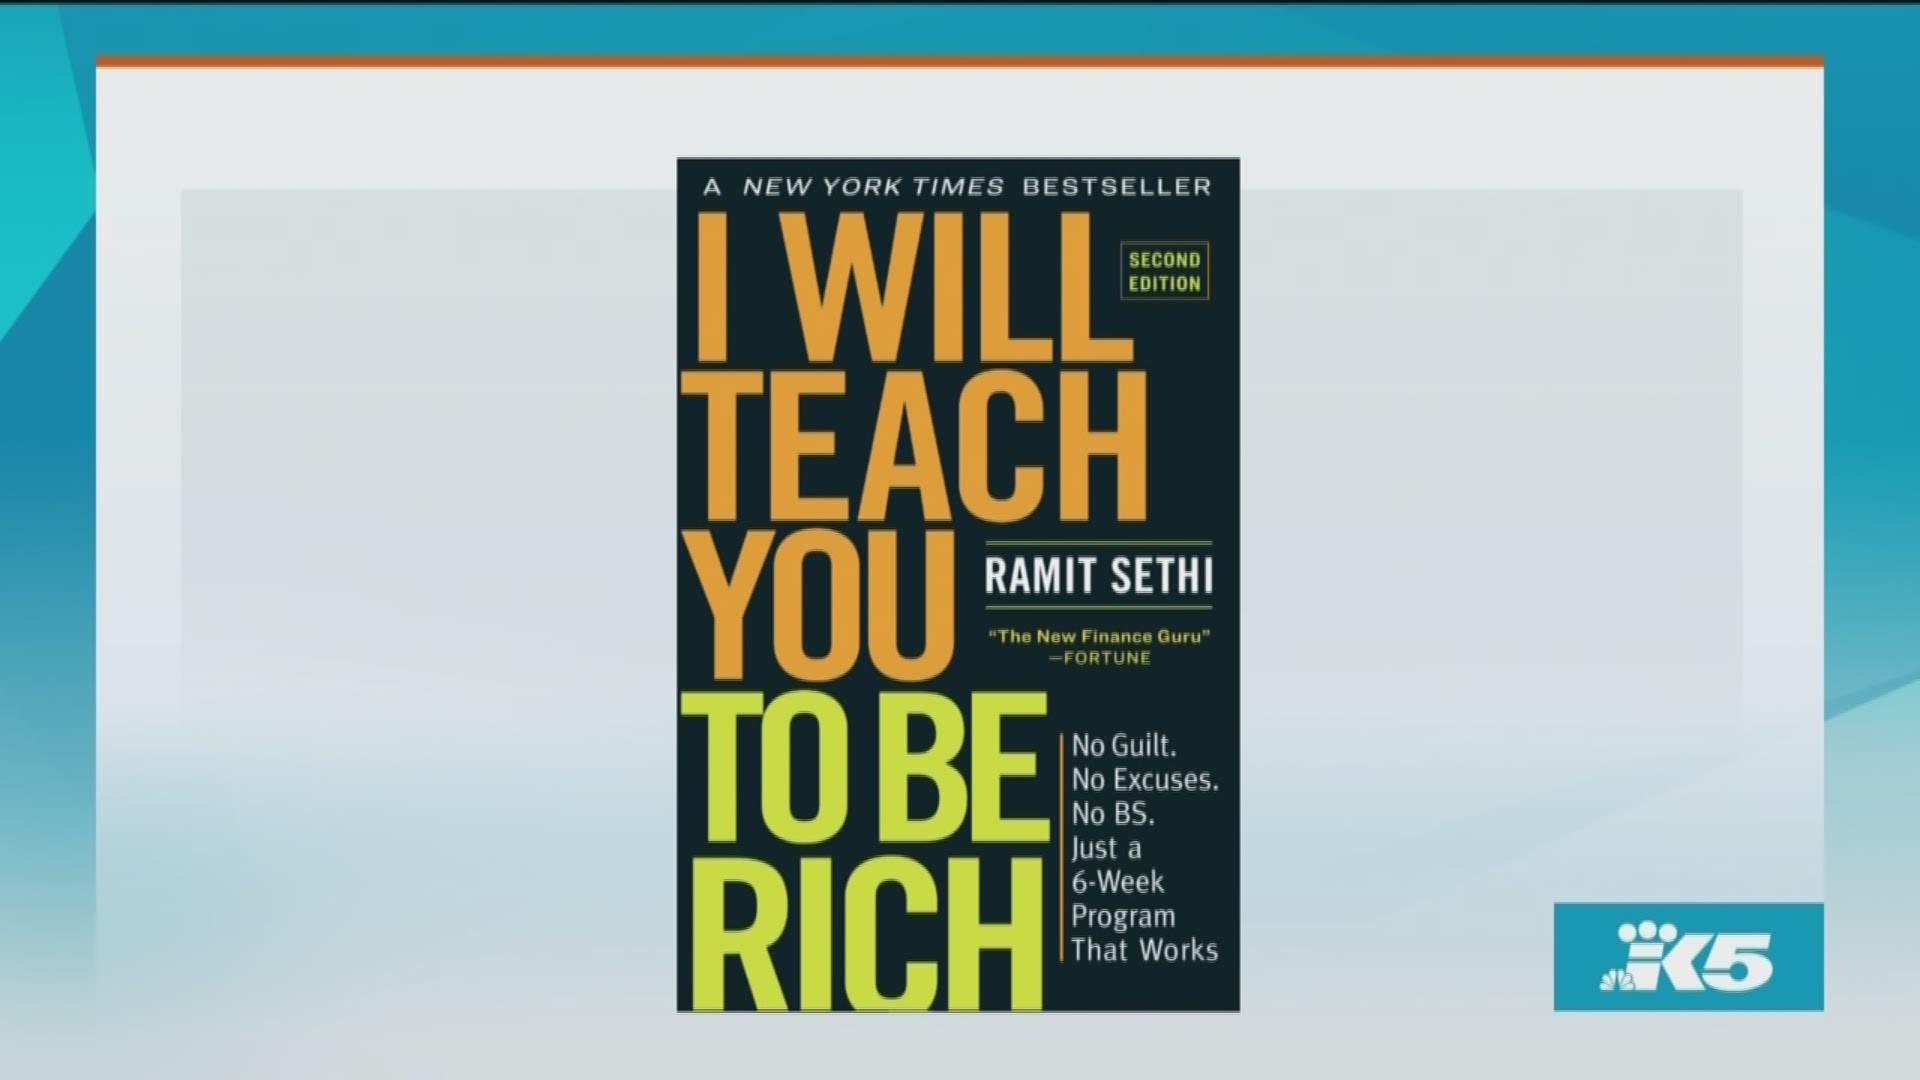 When Ramit Sethi's I Will Teach You To Be Rich came out in 2009, it was during a time of recession, layoffs and foreclosures. What has changed in 10 years?